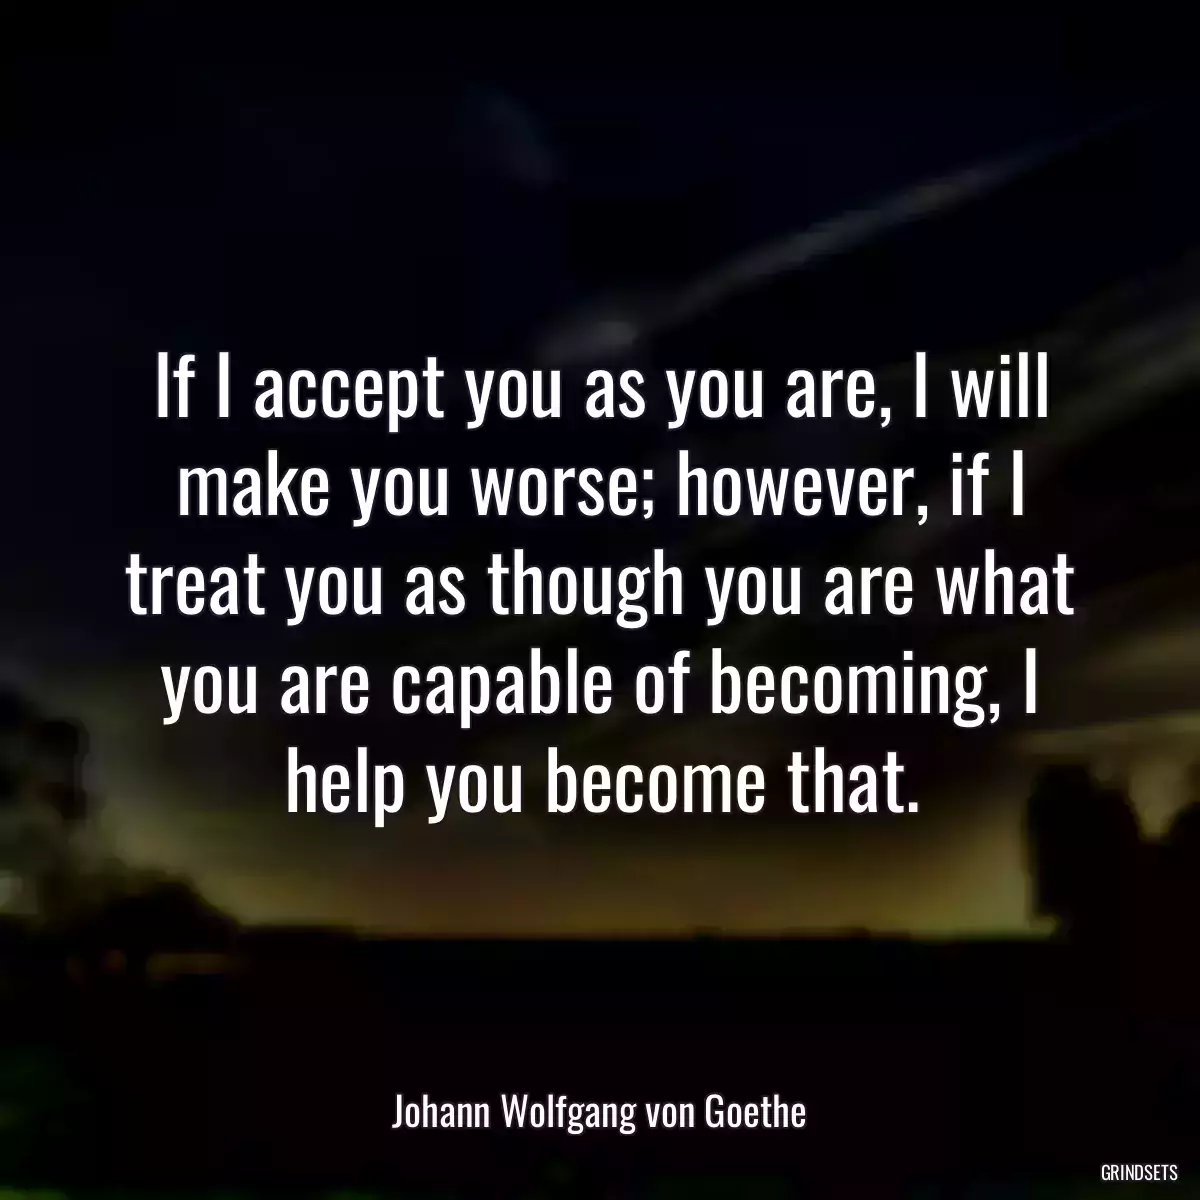 If I accept you as you are, I will make you worse; however, if I treat you as though you are what you are capable of becoming, I help you become that.